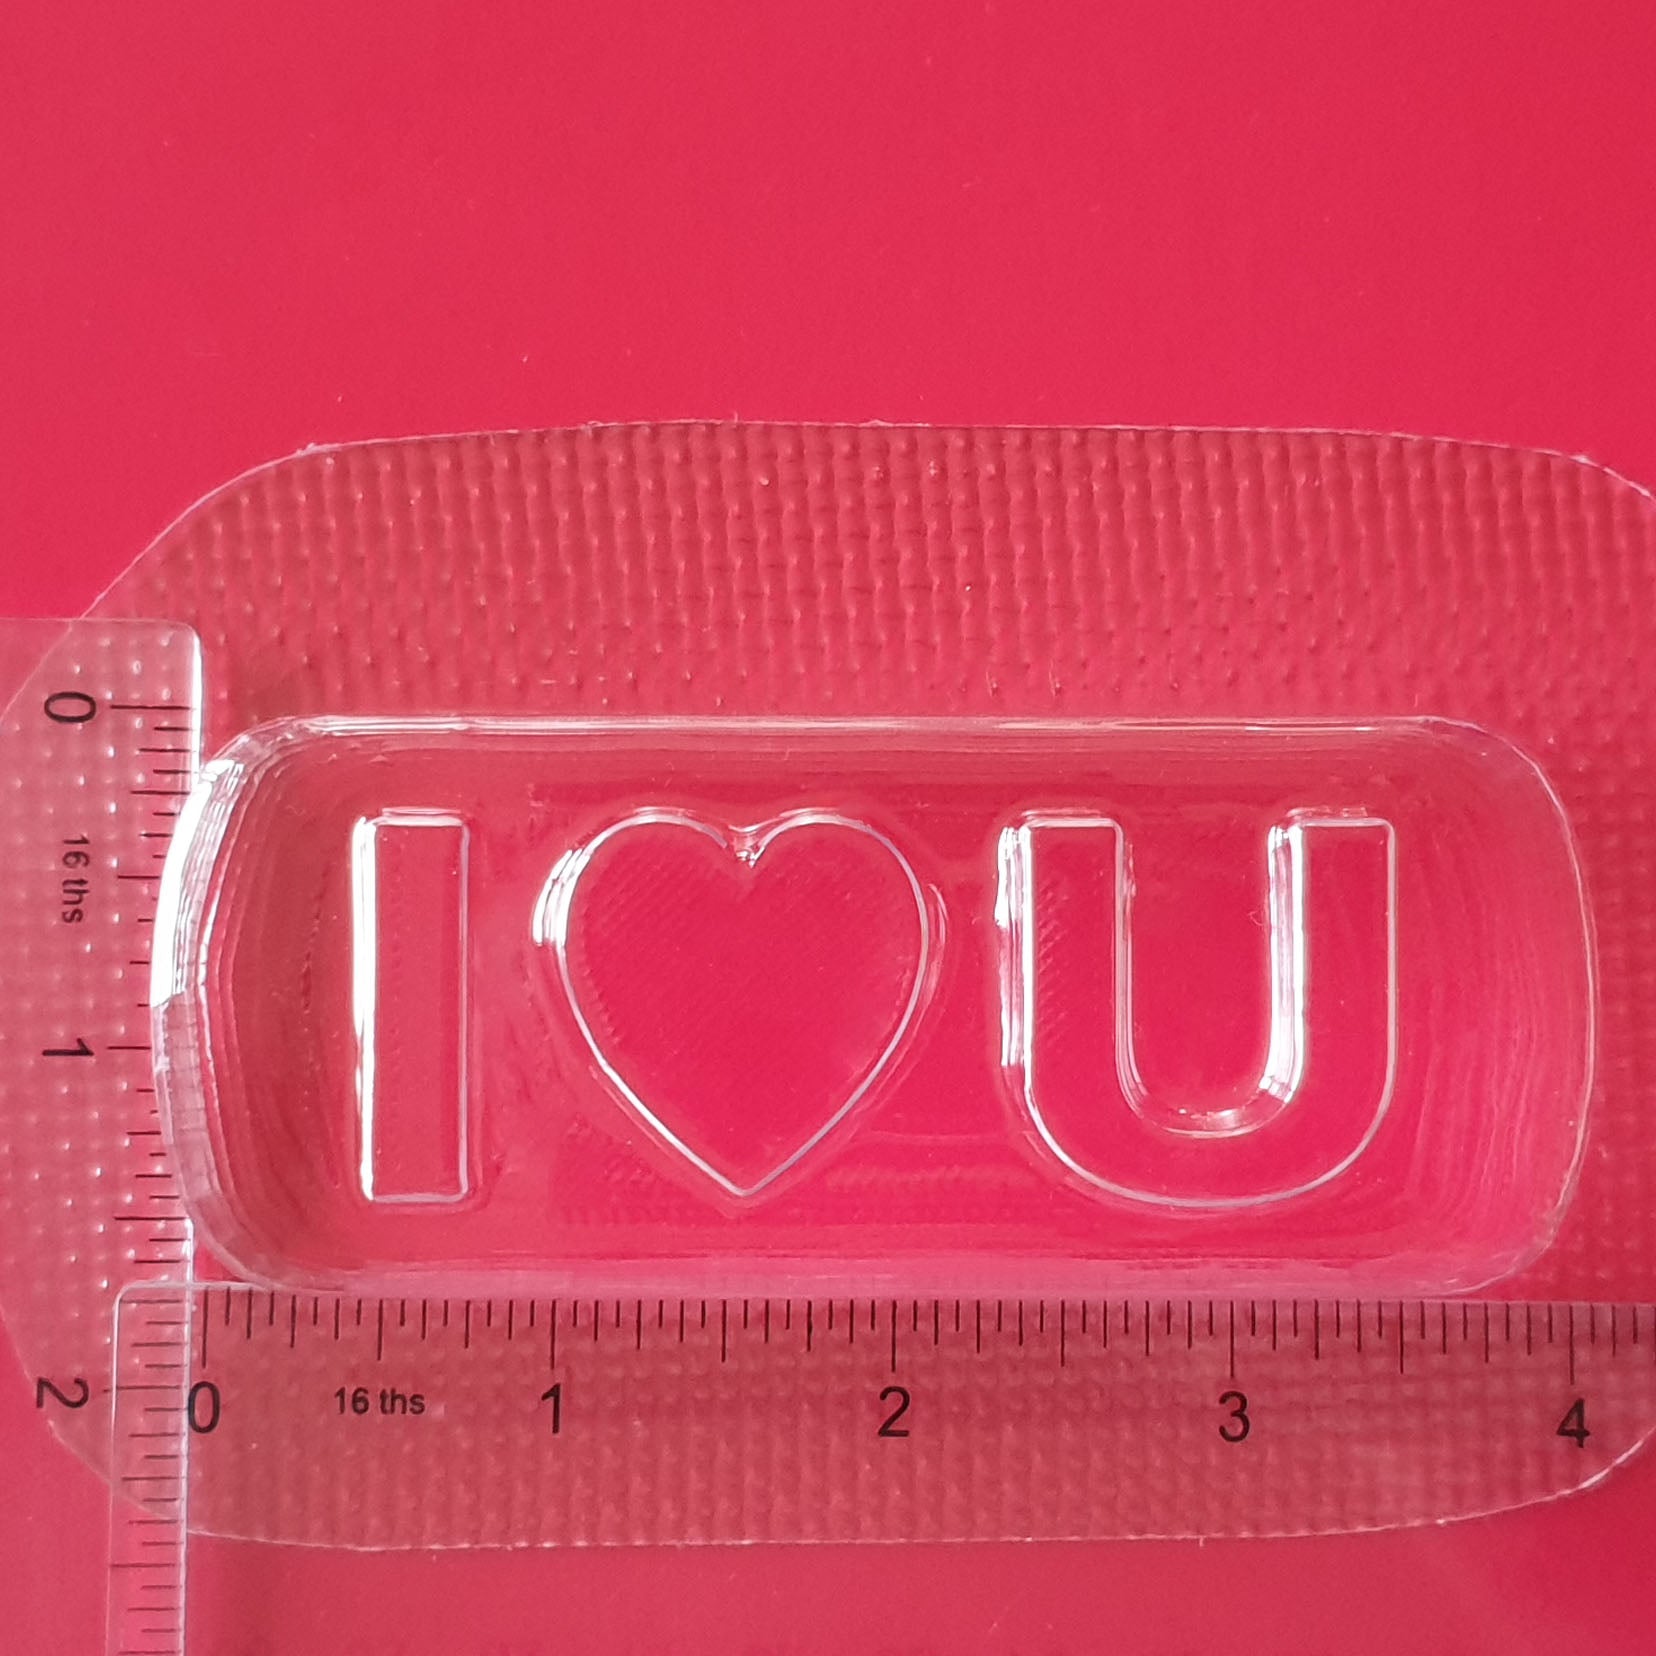 I Love You Mould | Truly Personal | Bath Bomb, Soap, Resin, Chocolate, Jelly, Wax Melts Mold